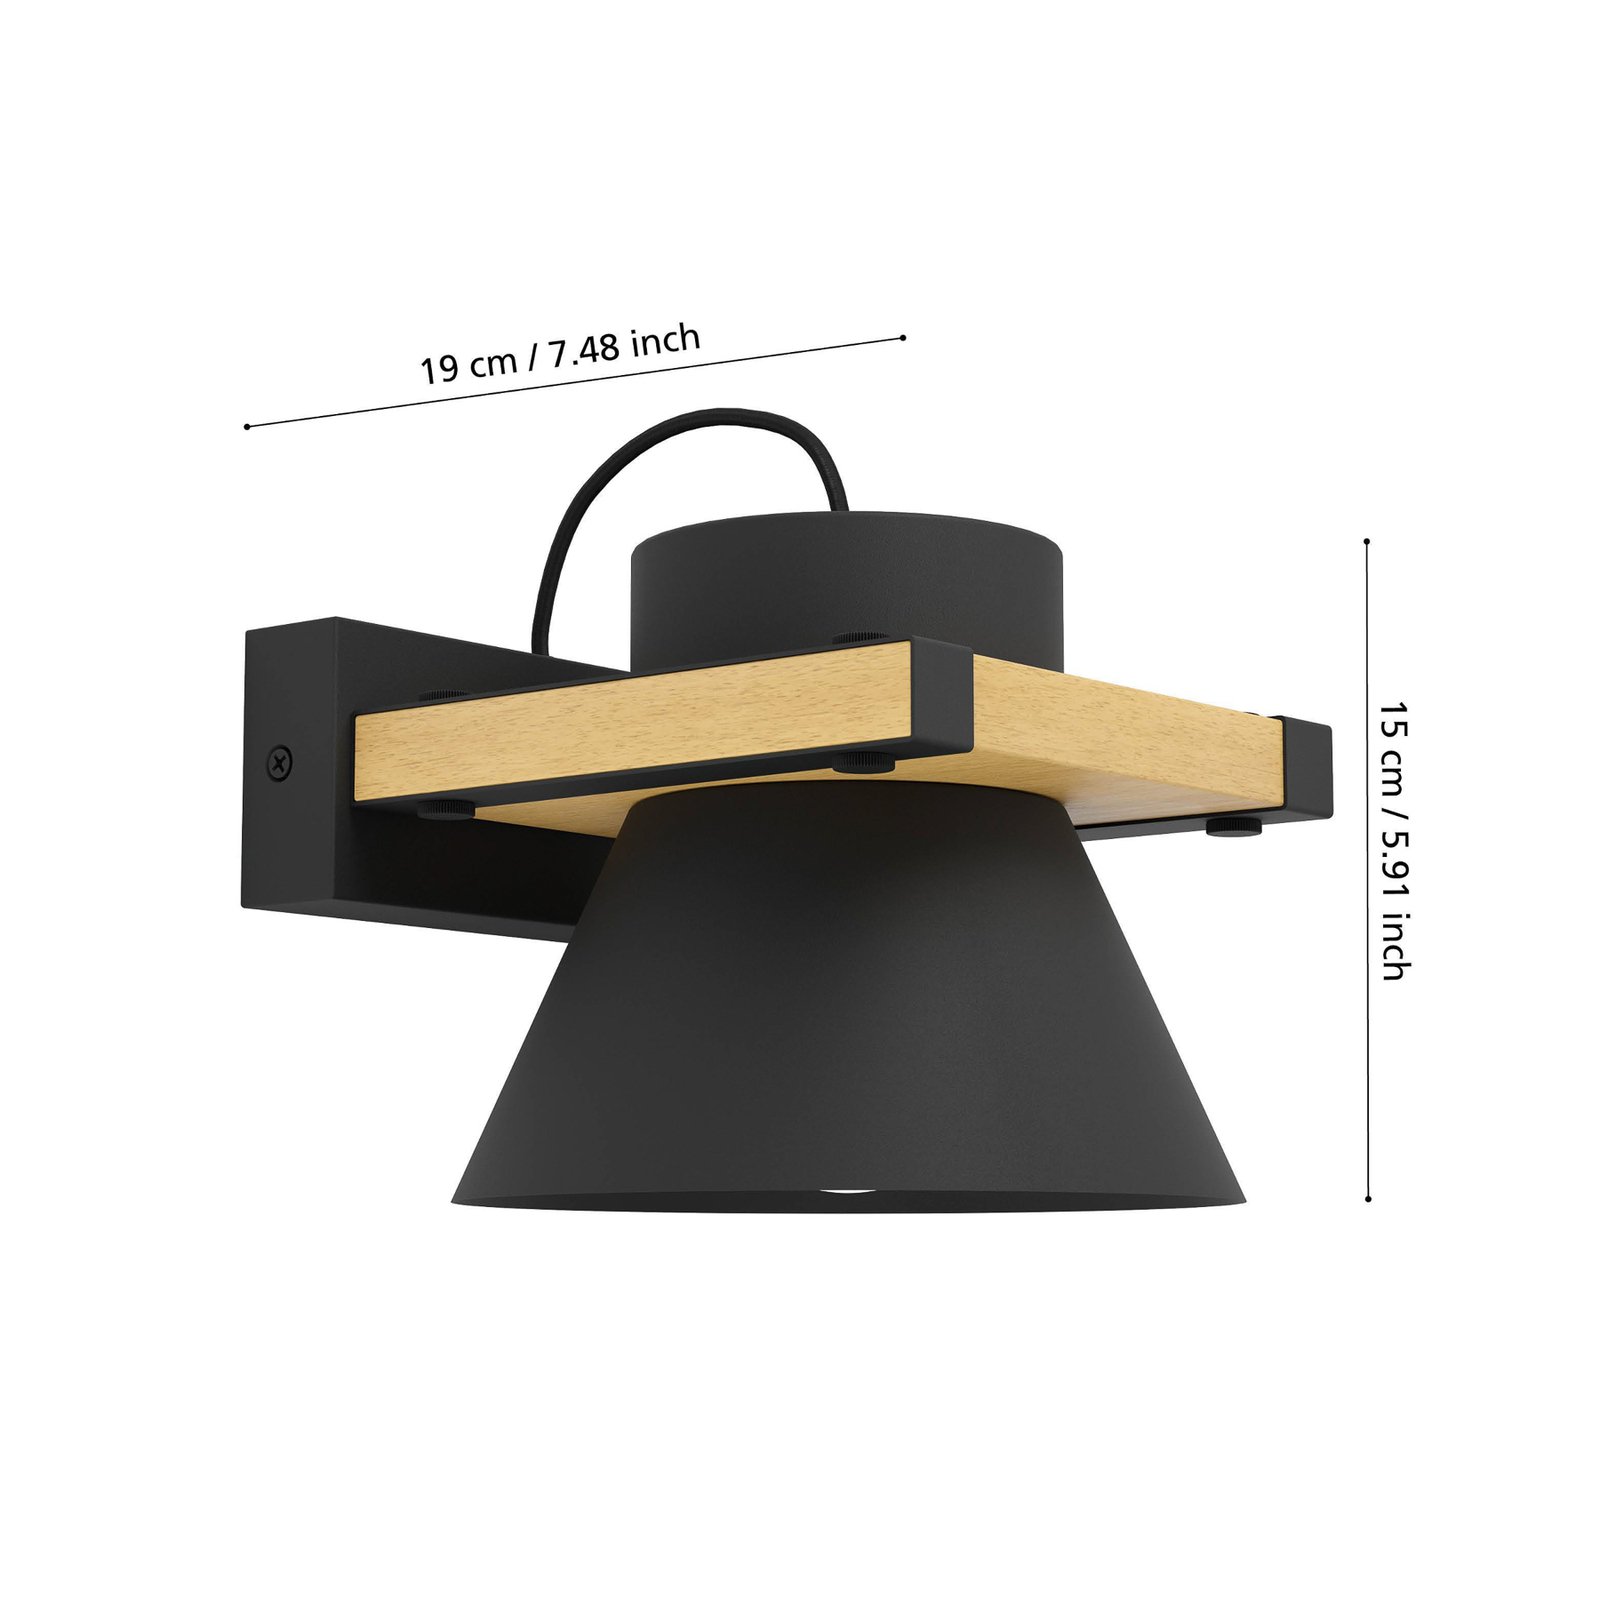 Maccles wall light in black with wood